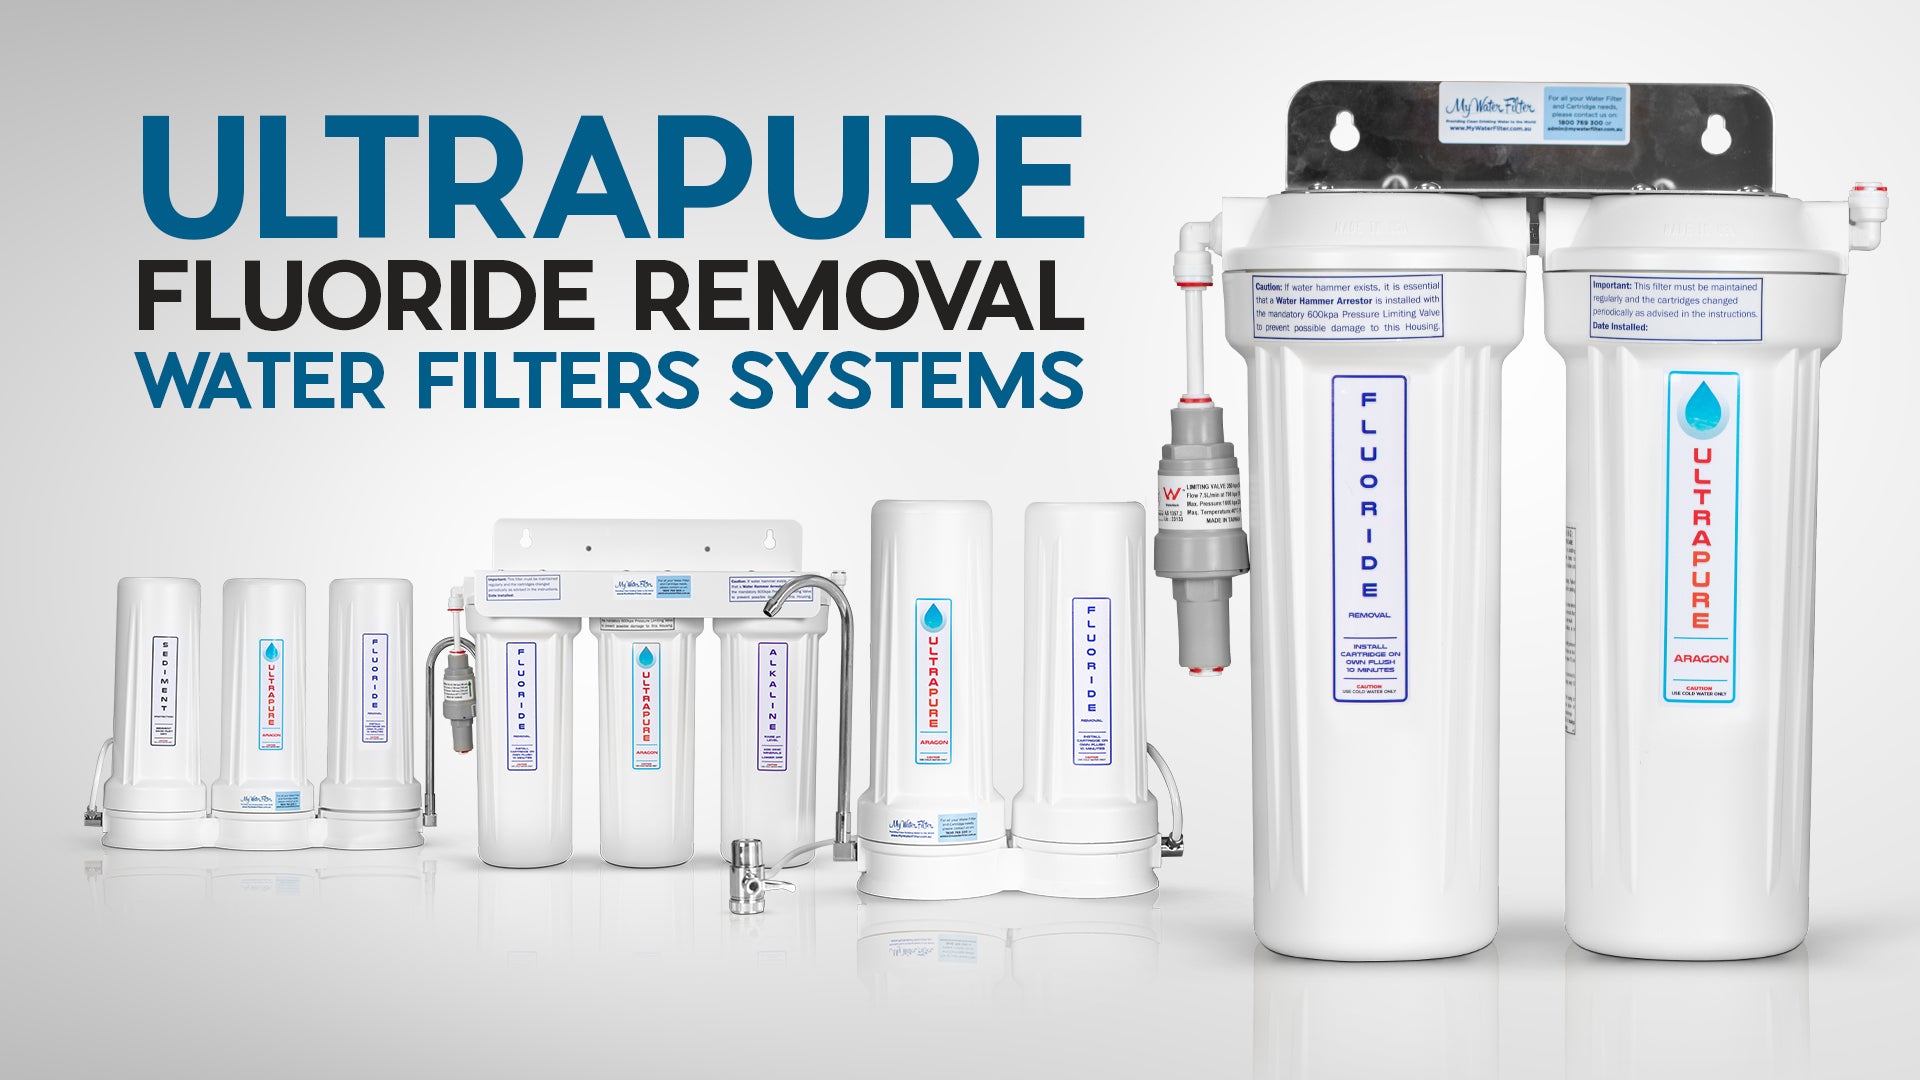 Ultrapure Benchtop and Under Sink Fluoride Removal Water Filters